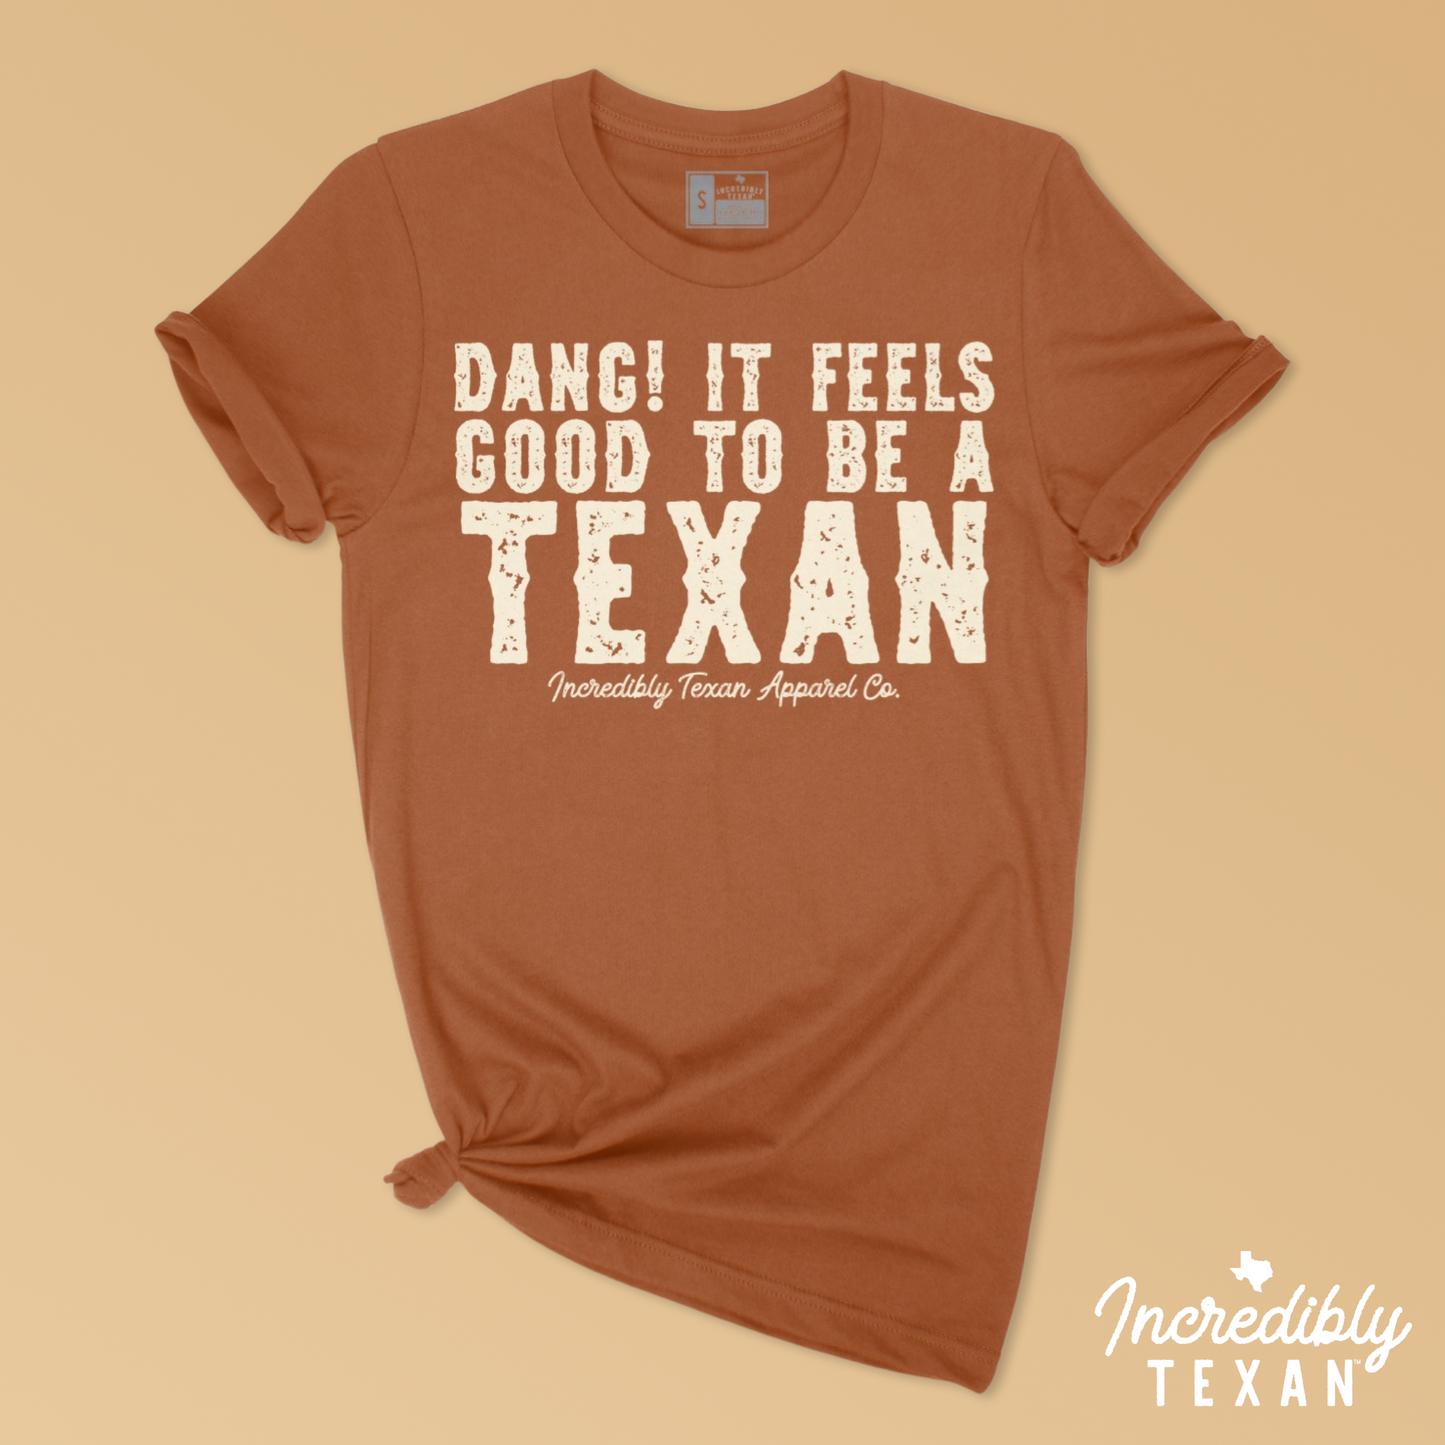 An orange, short sleeve shirt with a light beige print on the front that reads "DANG! IT FEELS GOOD TO BE A TEXAN - Incredibly Texan Apparel Co." in an Old West font.